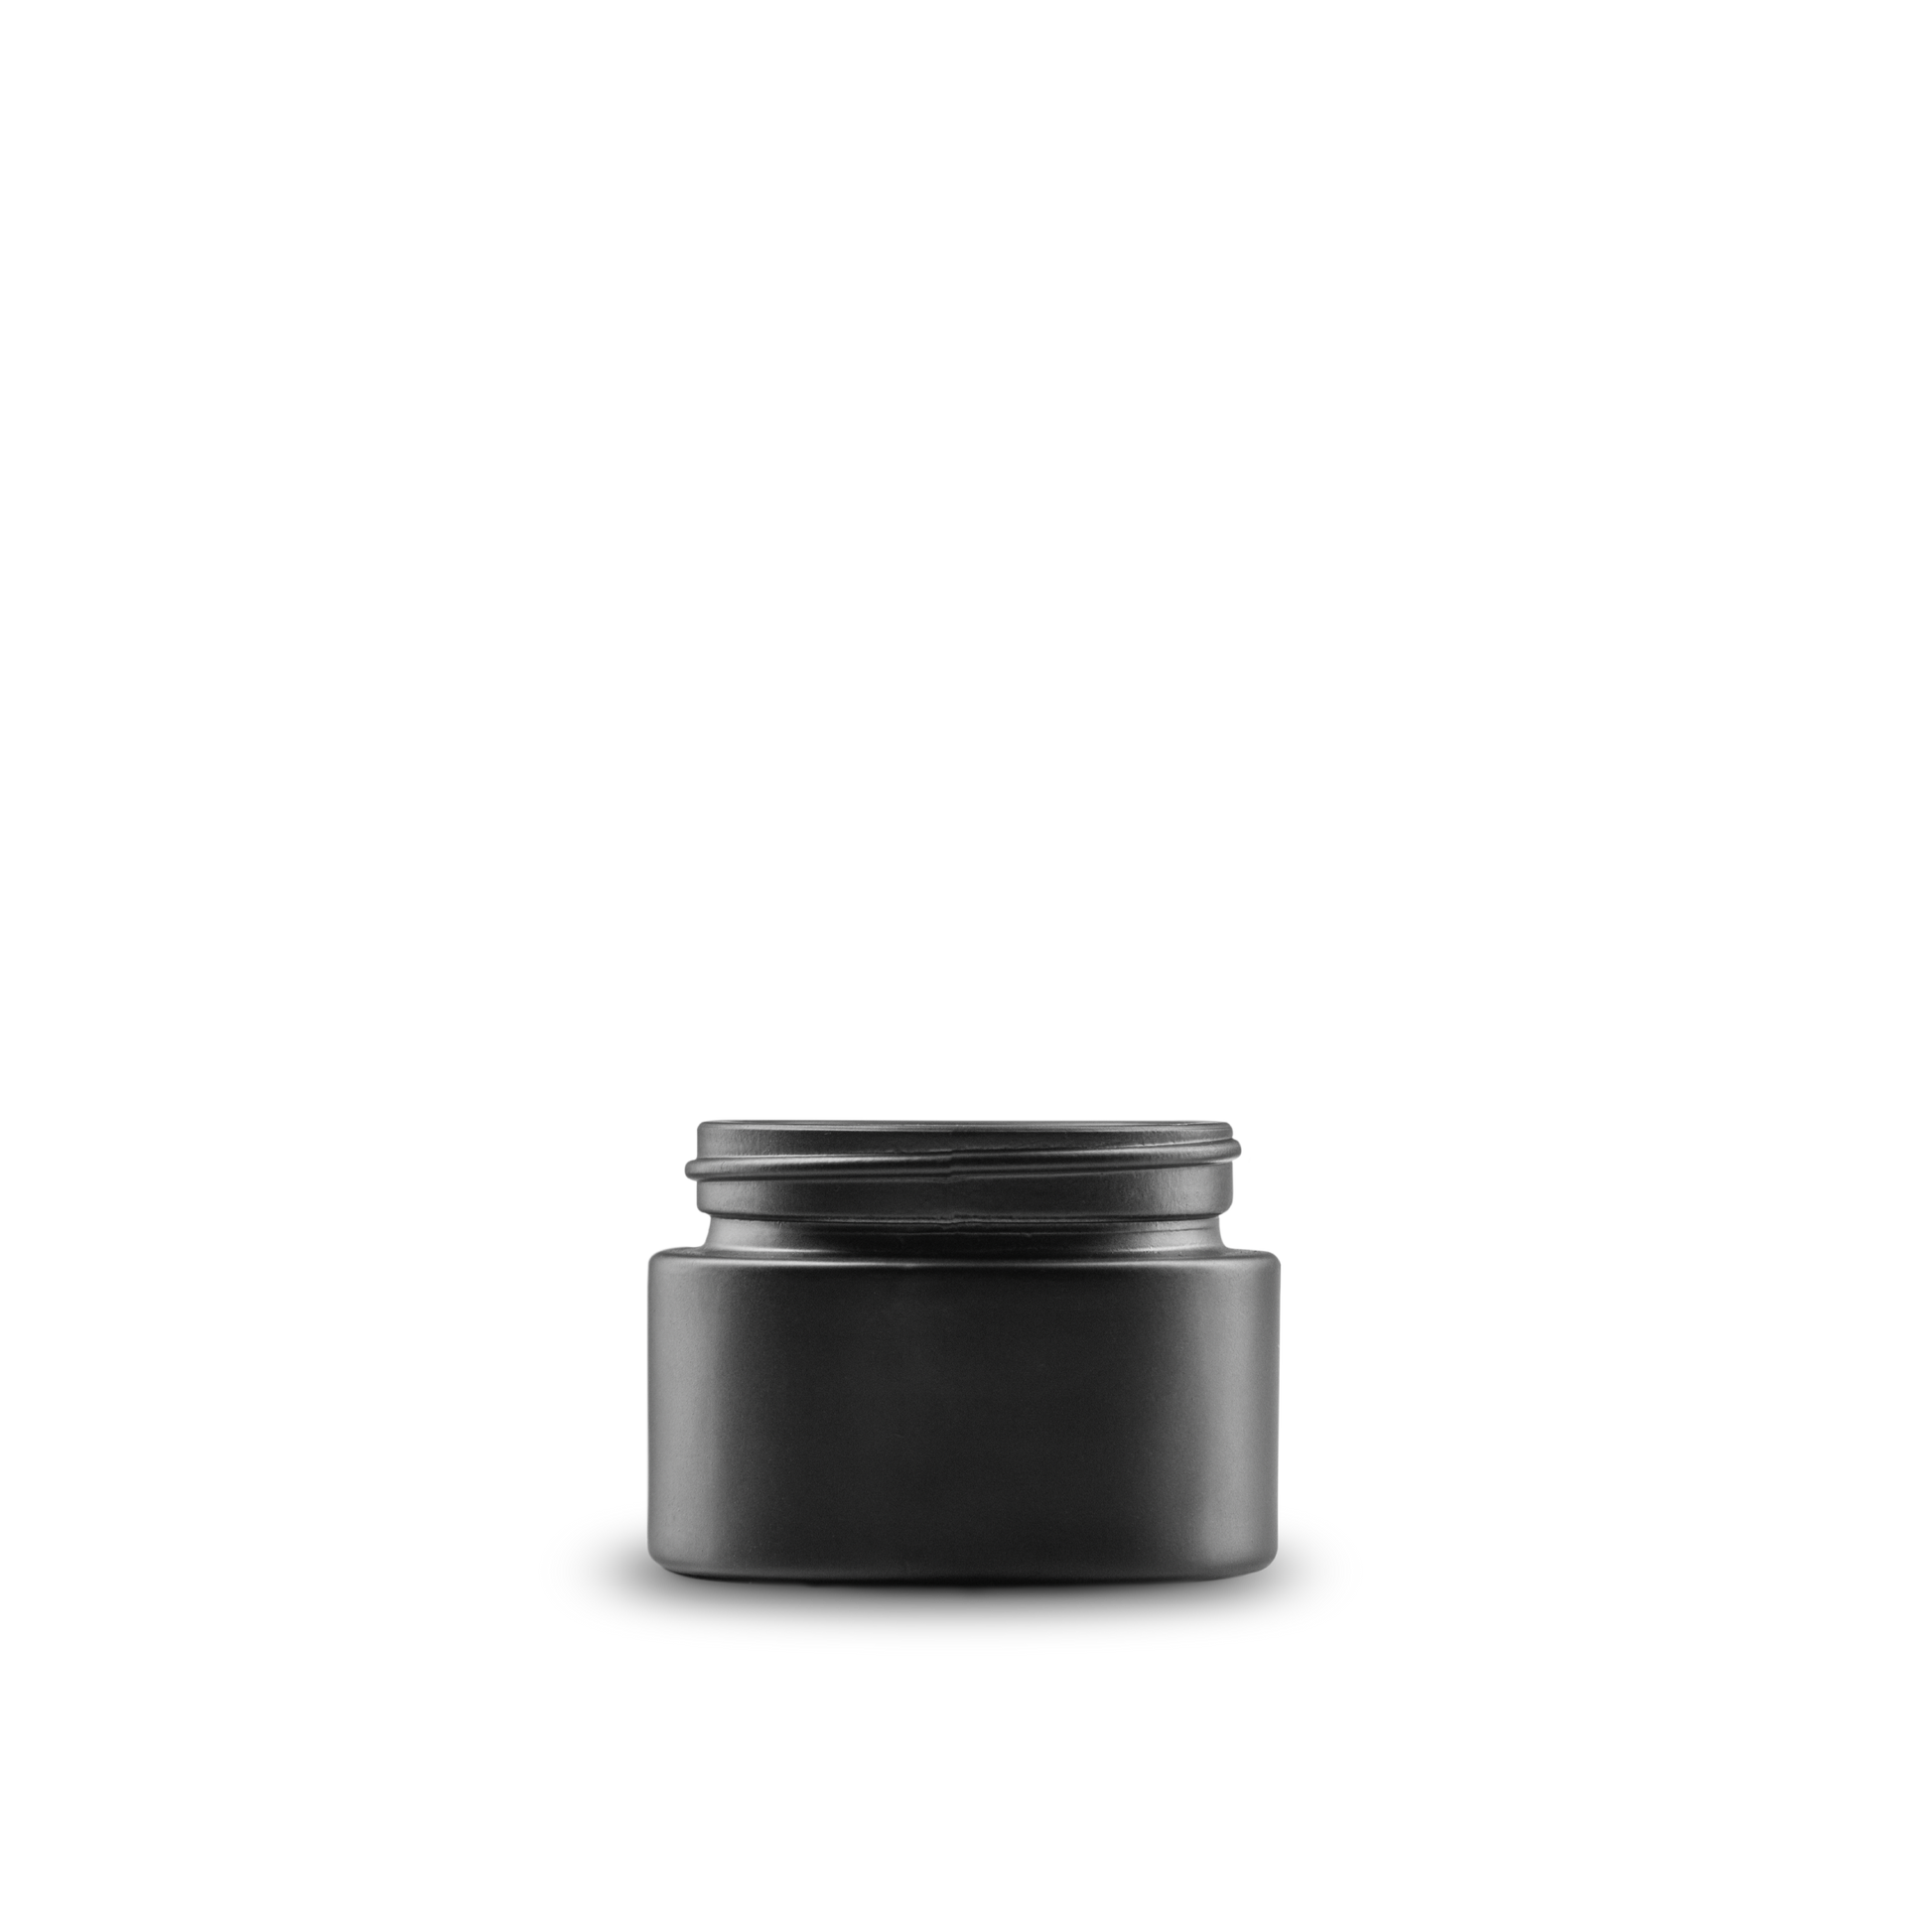 1 oz black frosted glass jars are the perfect option for preserving herbs and spices.